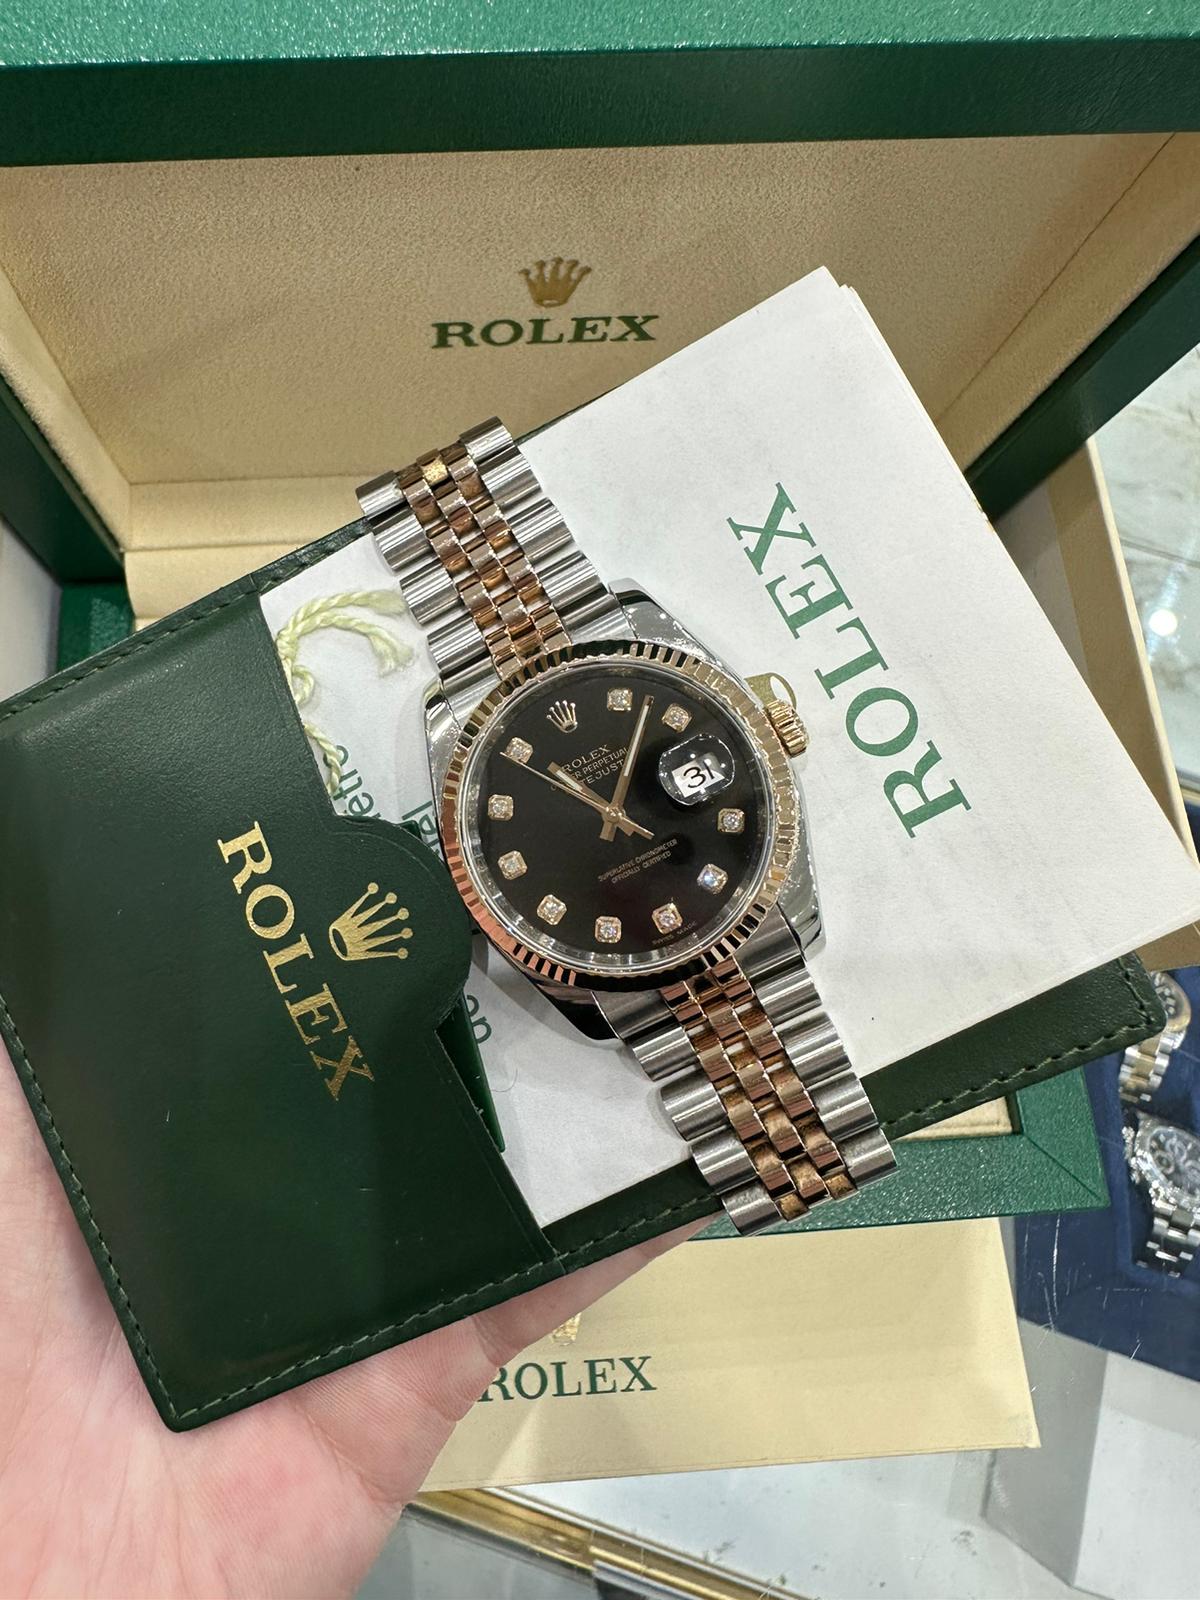 Rolex Datejust 36mm steel and rose gold concealed